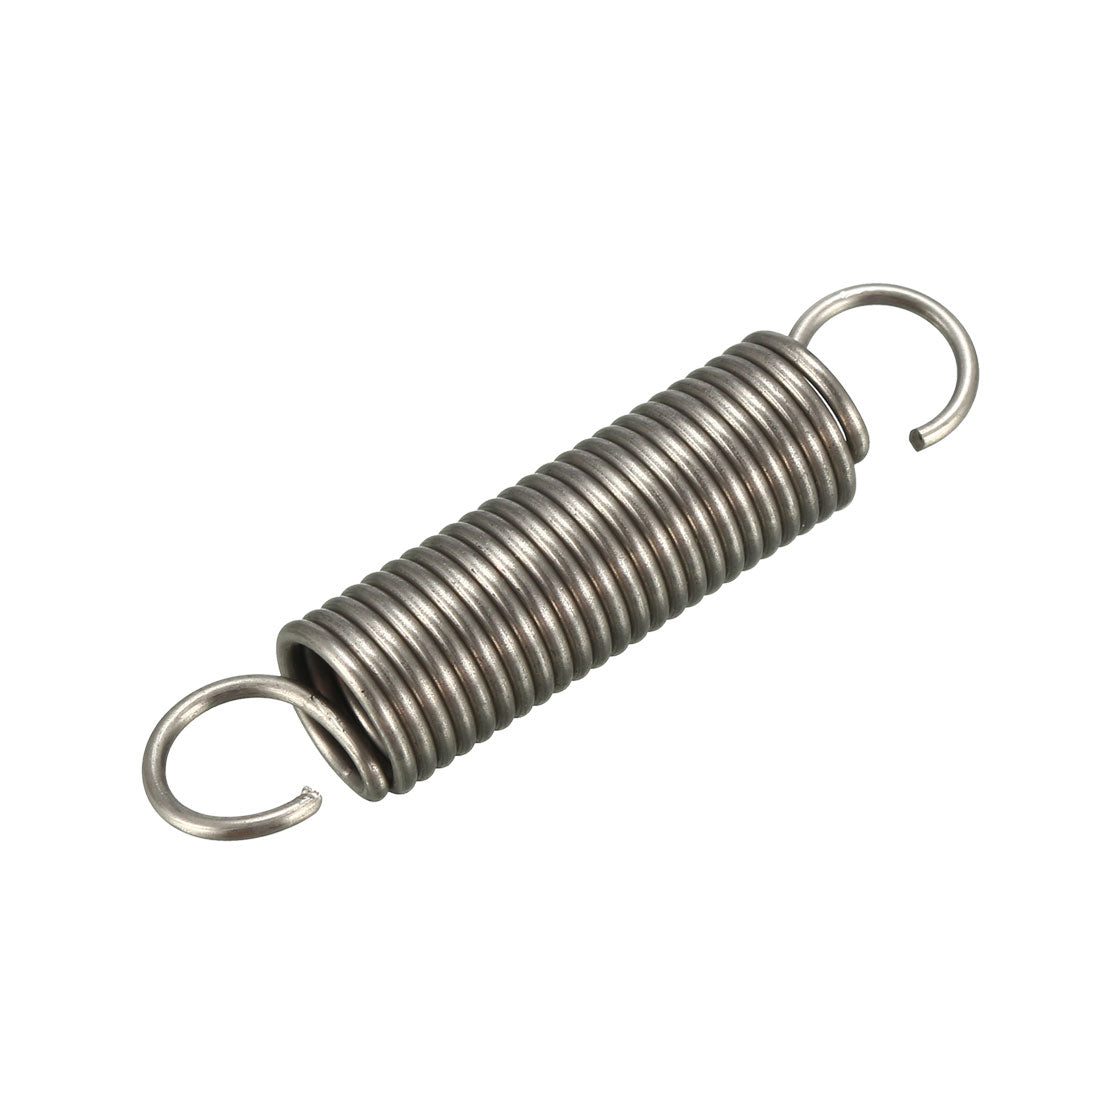 uxcell Uxcell Extended Tension Spring Wire Diameter 0.047", OD 0.39", Free Length 1.97" 2pcs